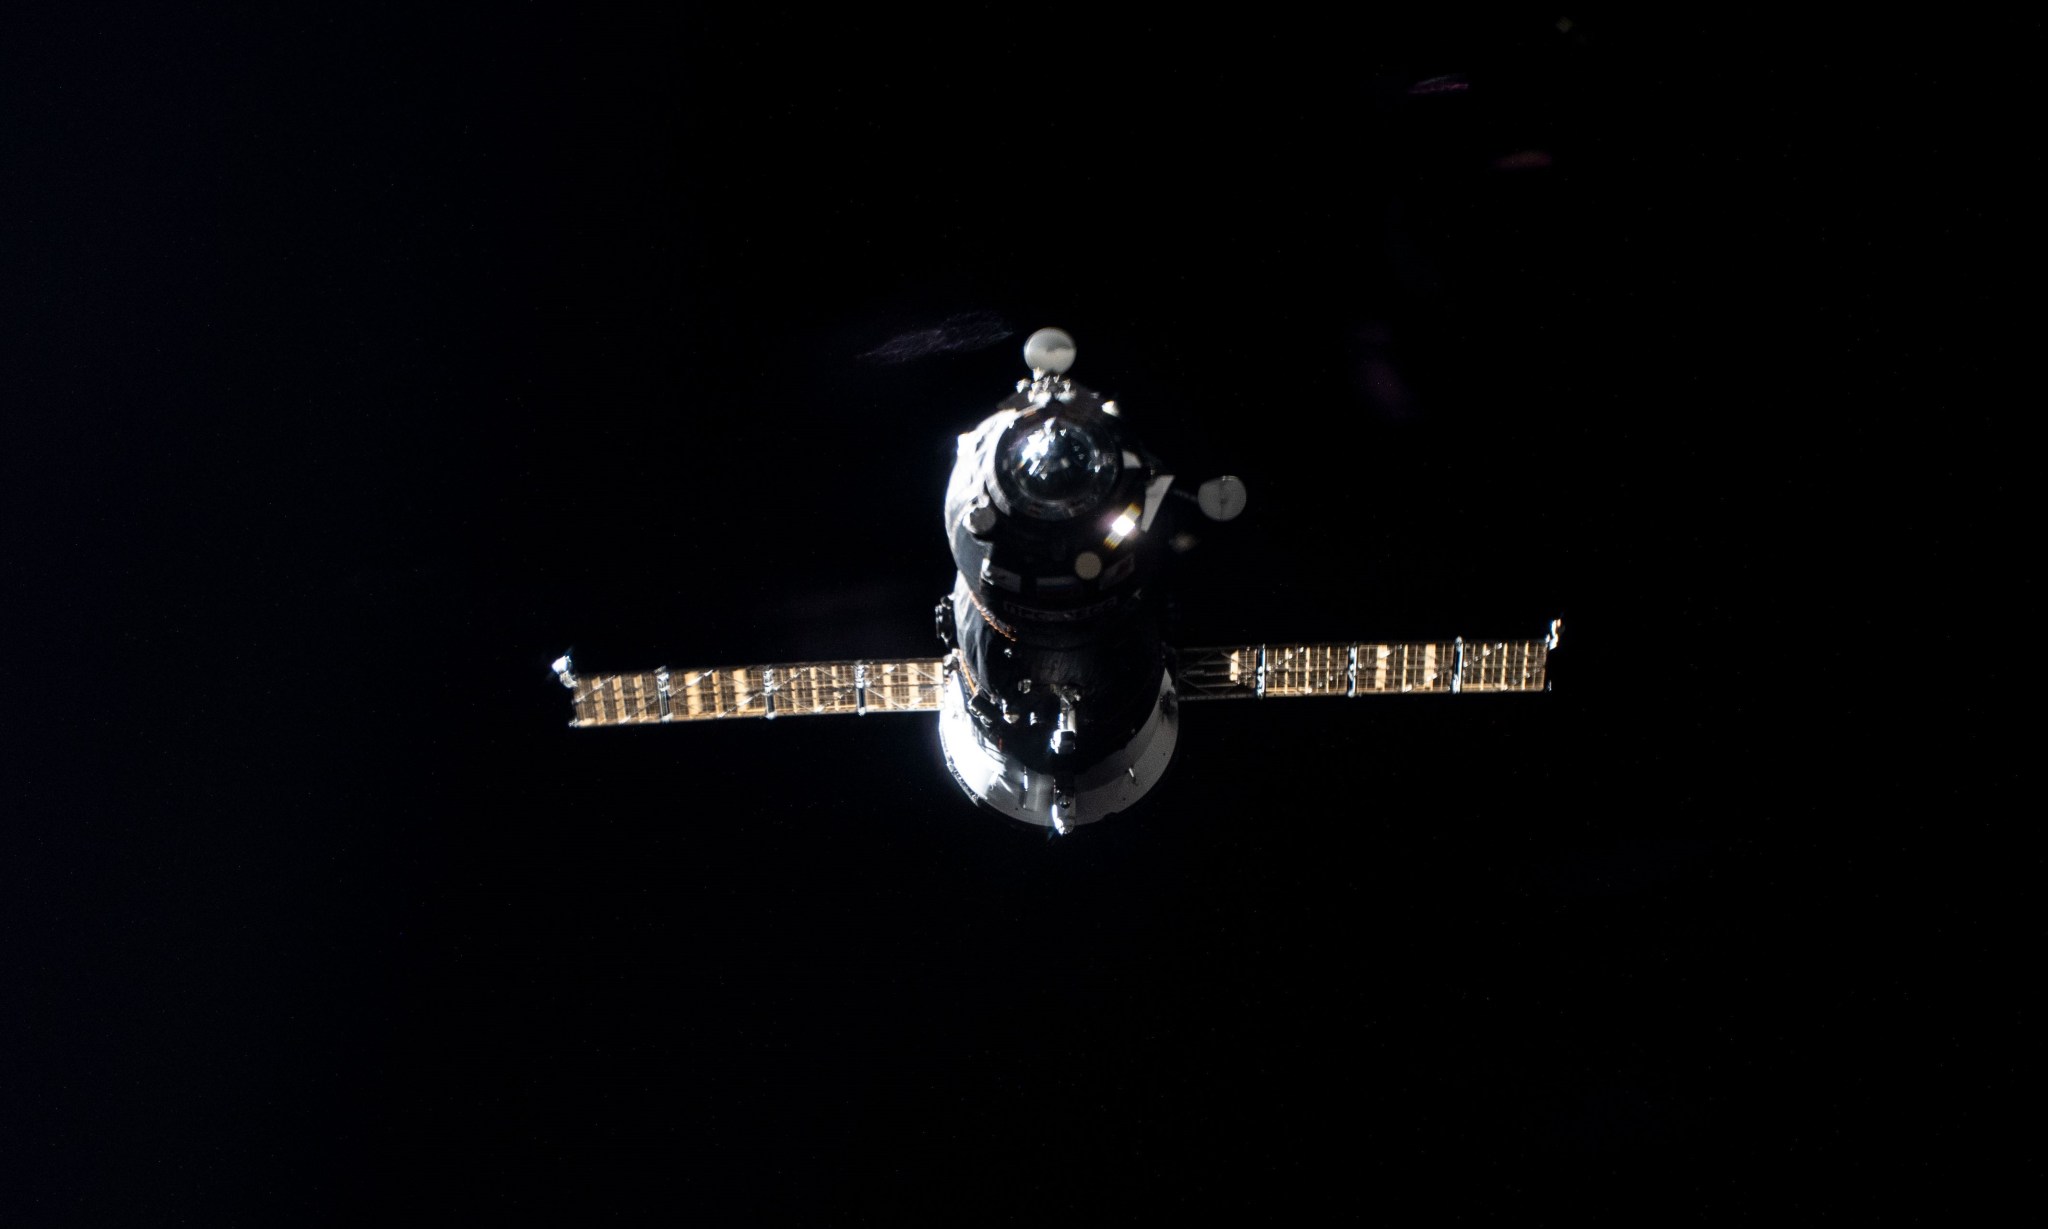 The uncrewed ISS Progress 77 resupply ship pictured approaching the International Space Station